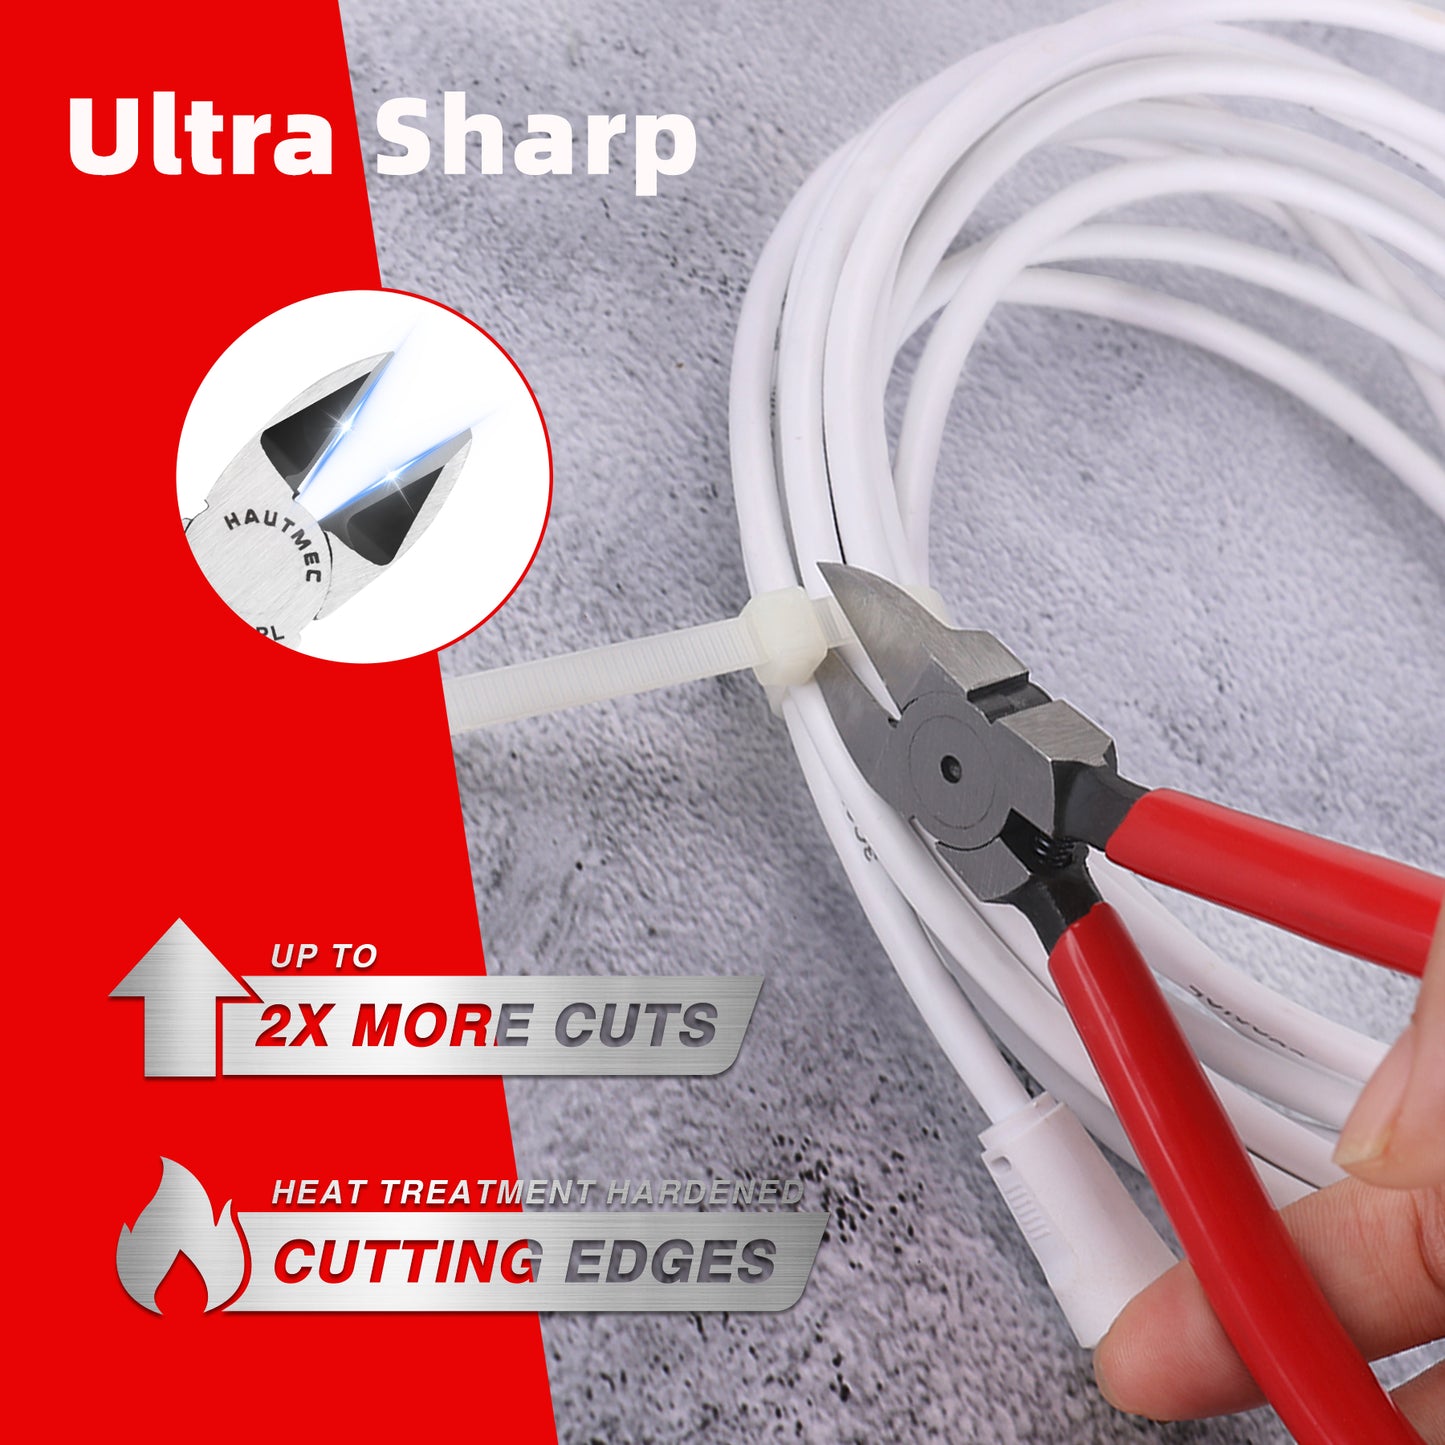 HAUTMEC 6" Flush Cut Pliers Ultra Sharp Wire Cutters with Spring Loaded and Non-slip Grip, Ideal Wire Snips for Plastic, Soft Wire, Toy Model Kits, Jewelry Marking, Zip Ties, Hard Board HT0318